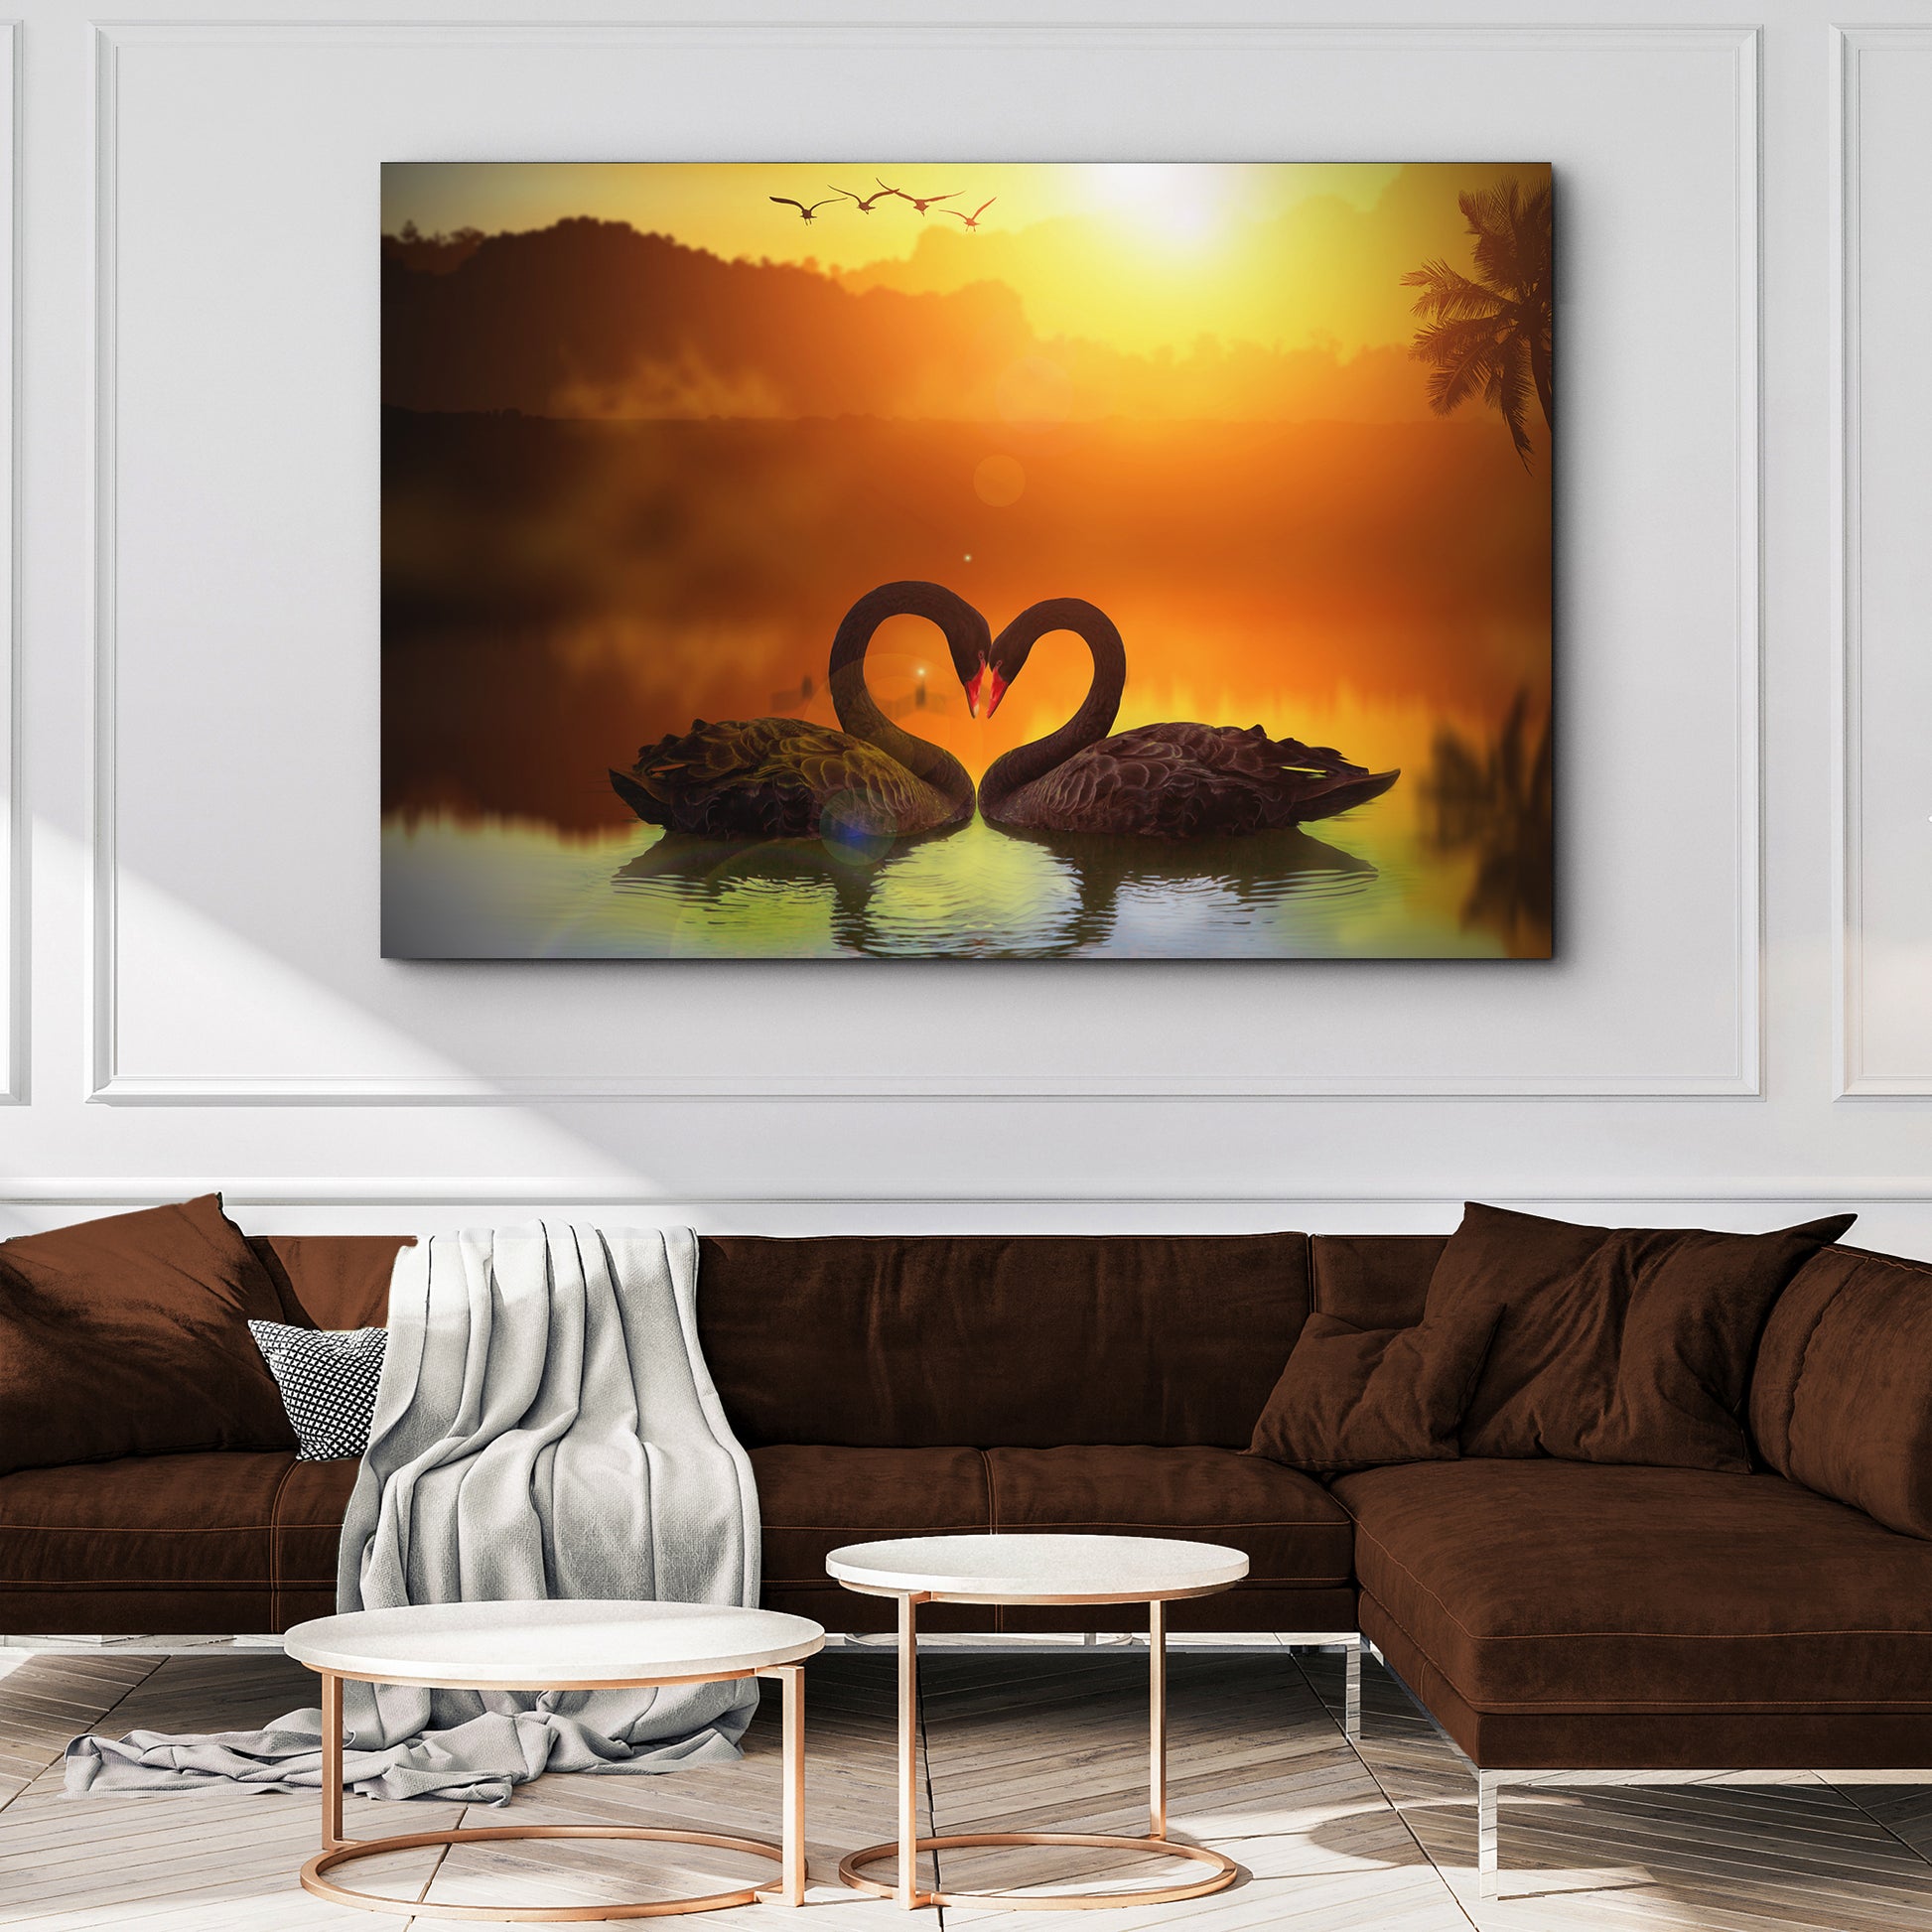 Romantic Swan at Sunset Canvas Wall Art - Image by Tailored Canvases